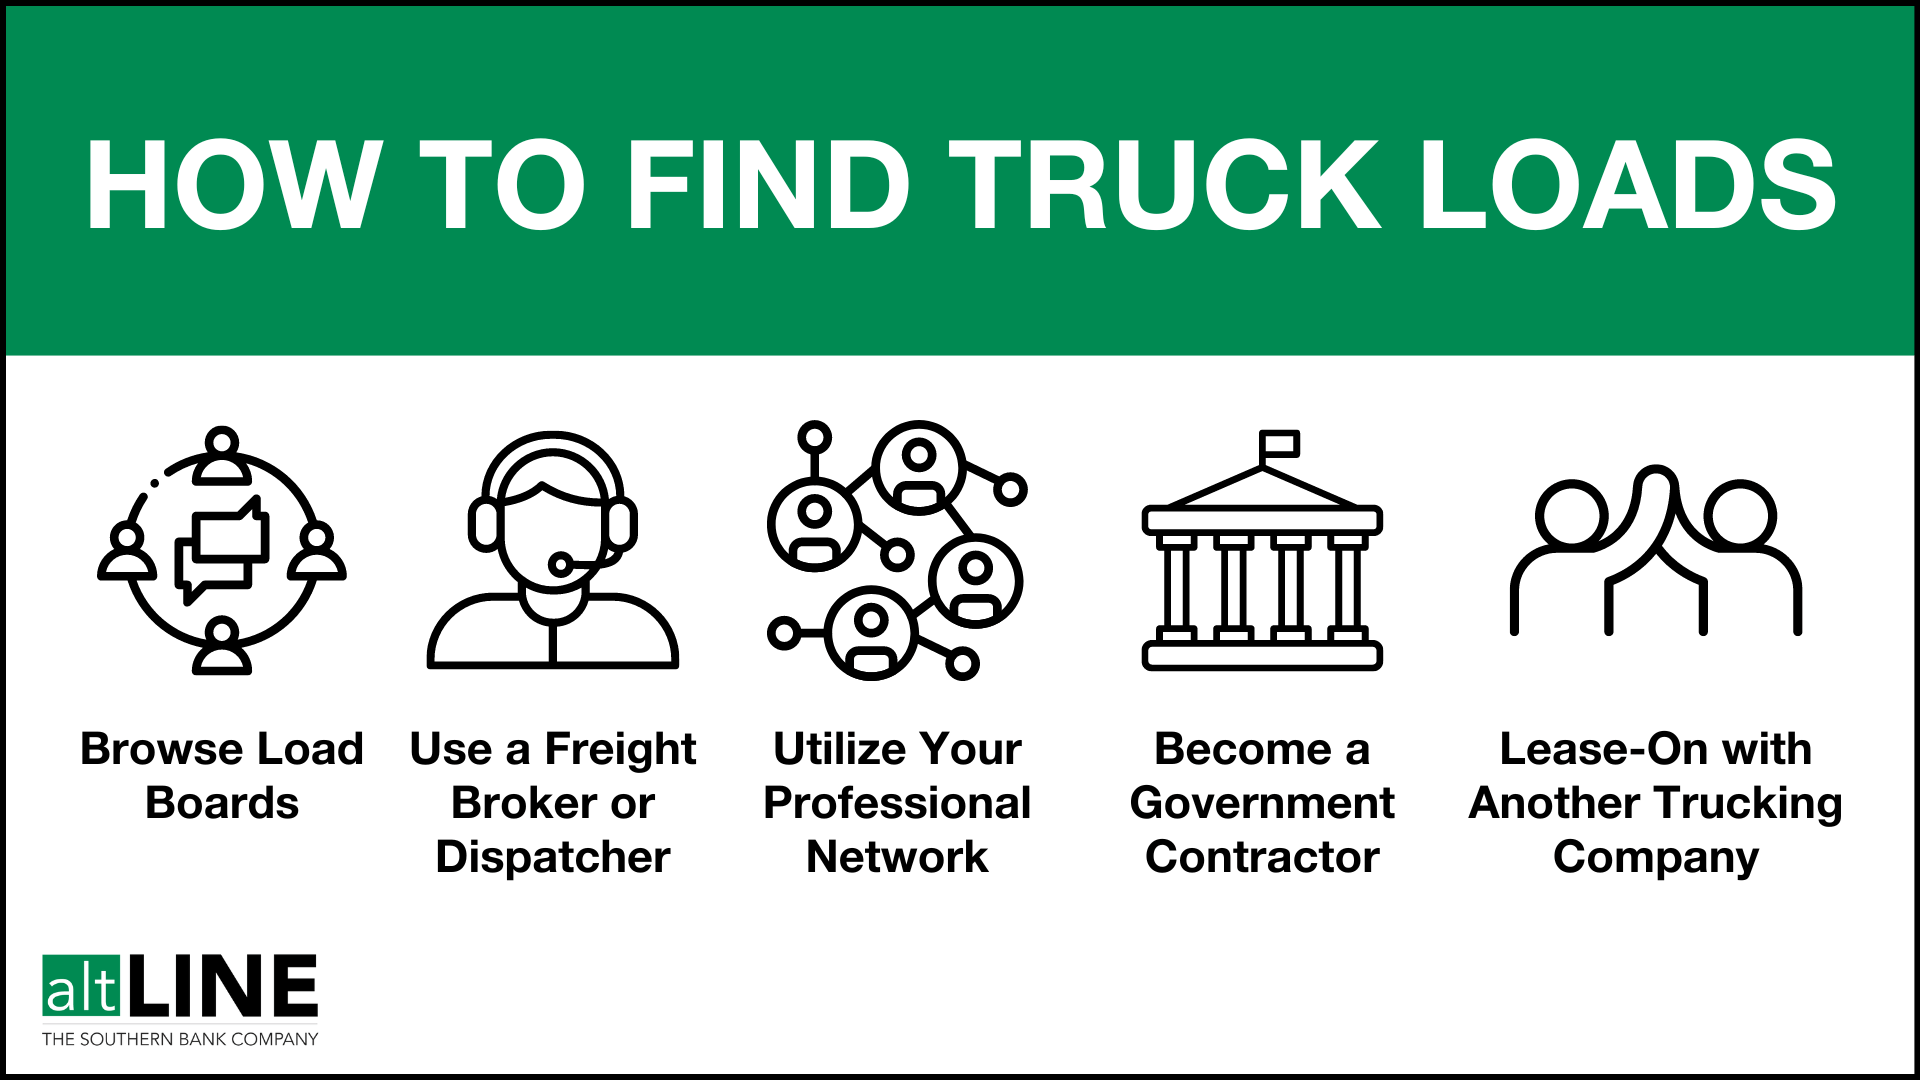 How to Find Truck Loads